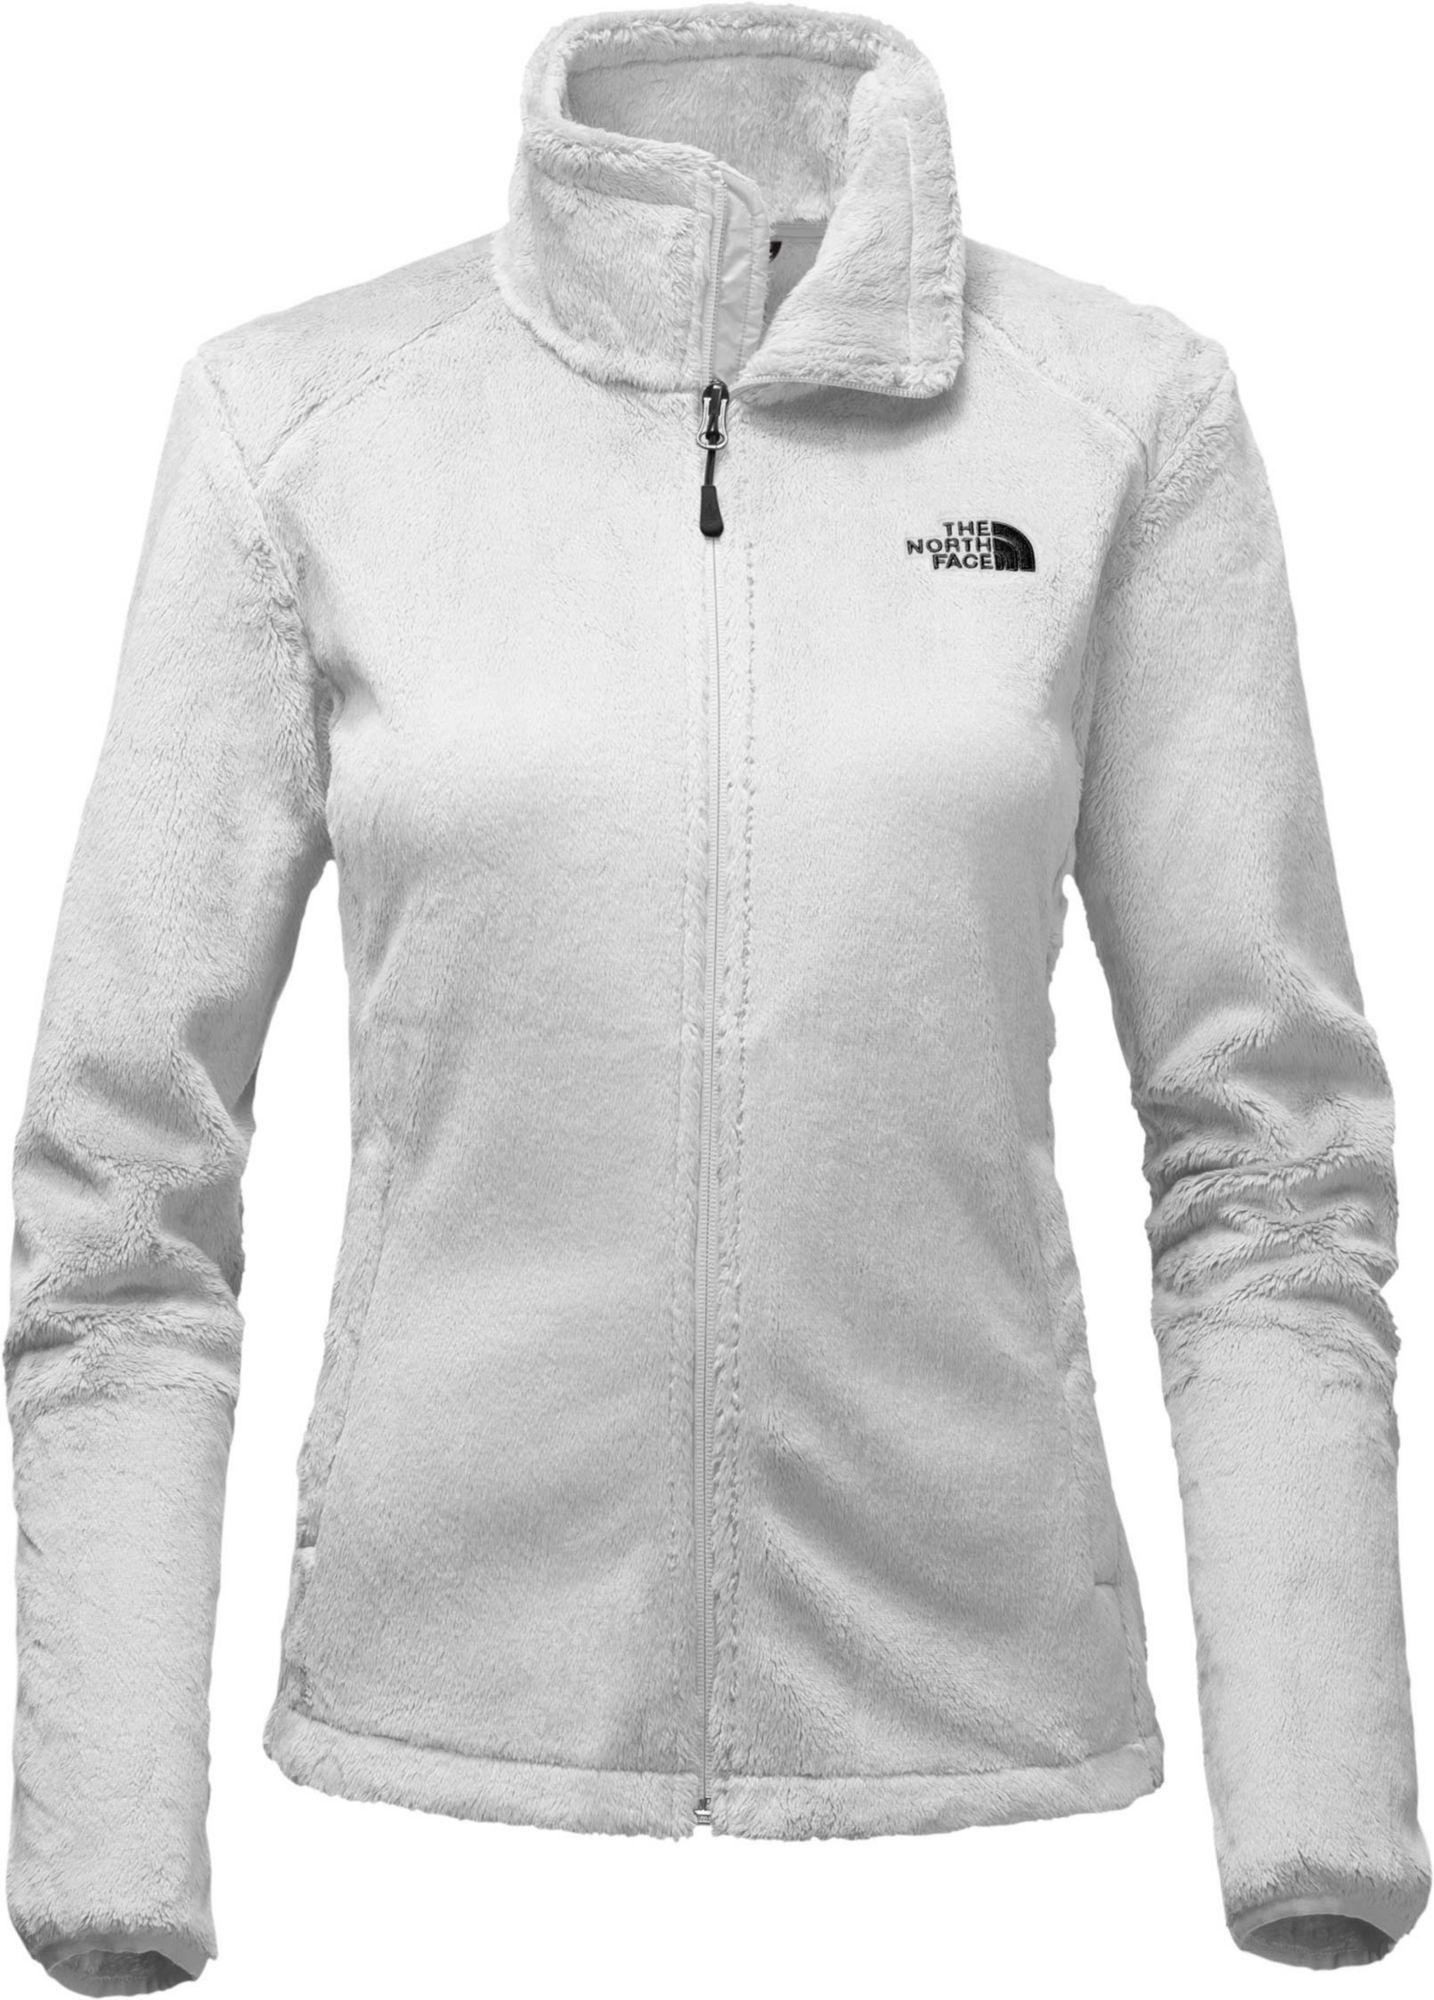 The North Face Osito 2 Fleece Jacket in White - Lyst